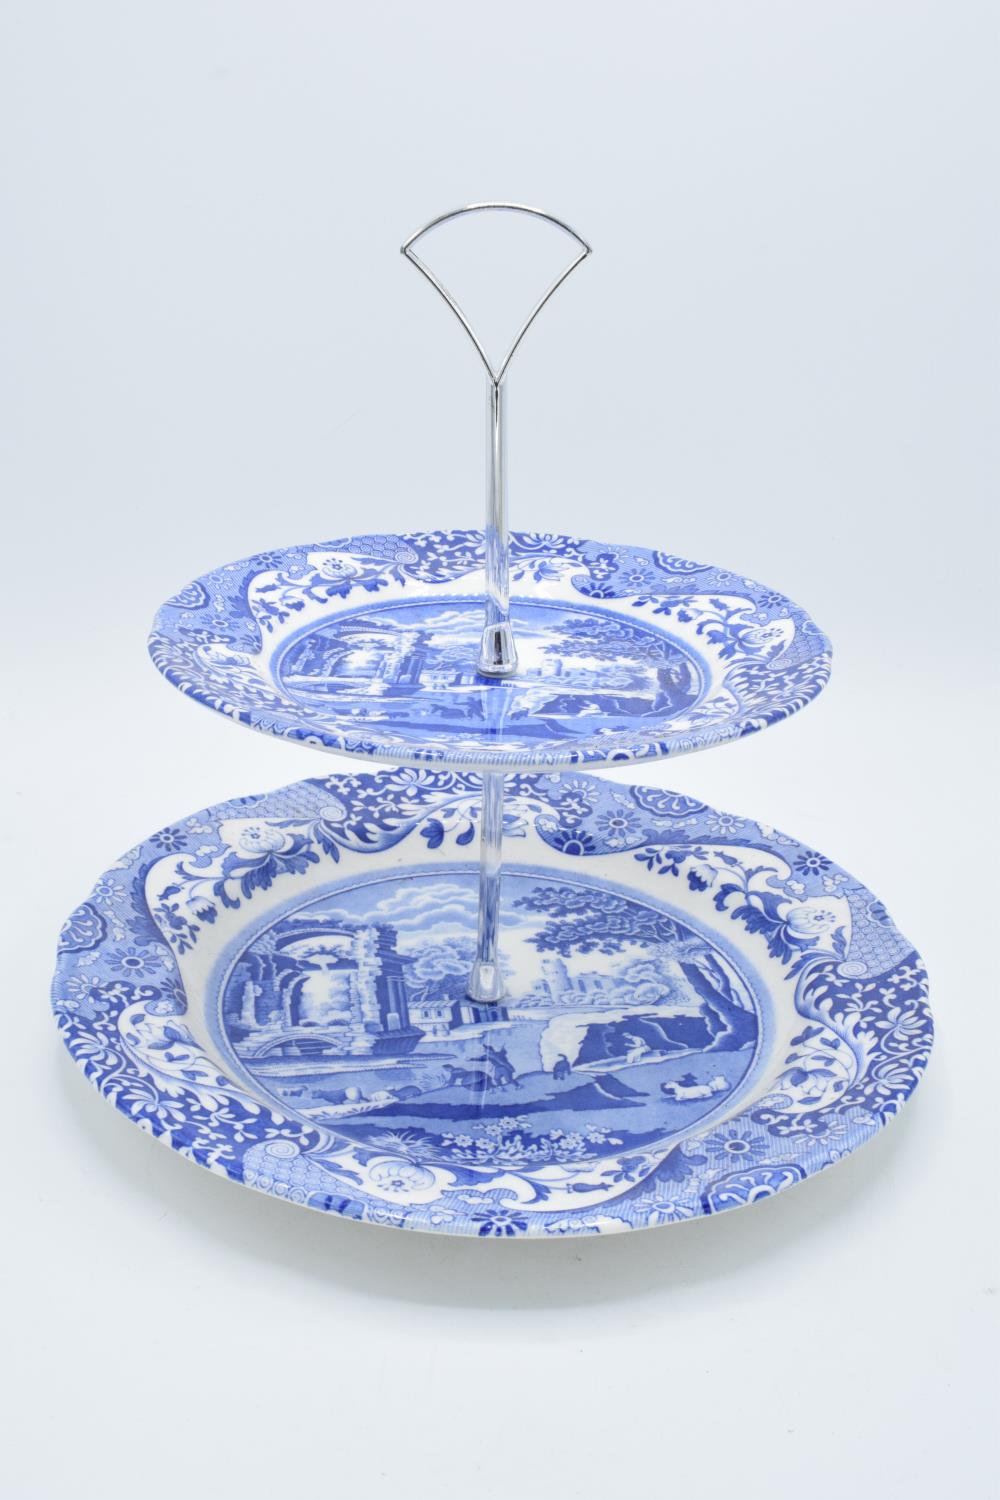 Spode Blue Italian 2 tier cakestand. In good condition with no obvious damage or restoration. Height